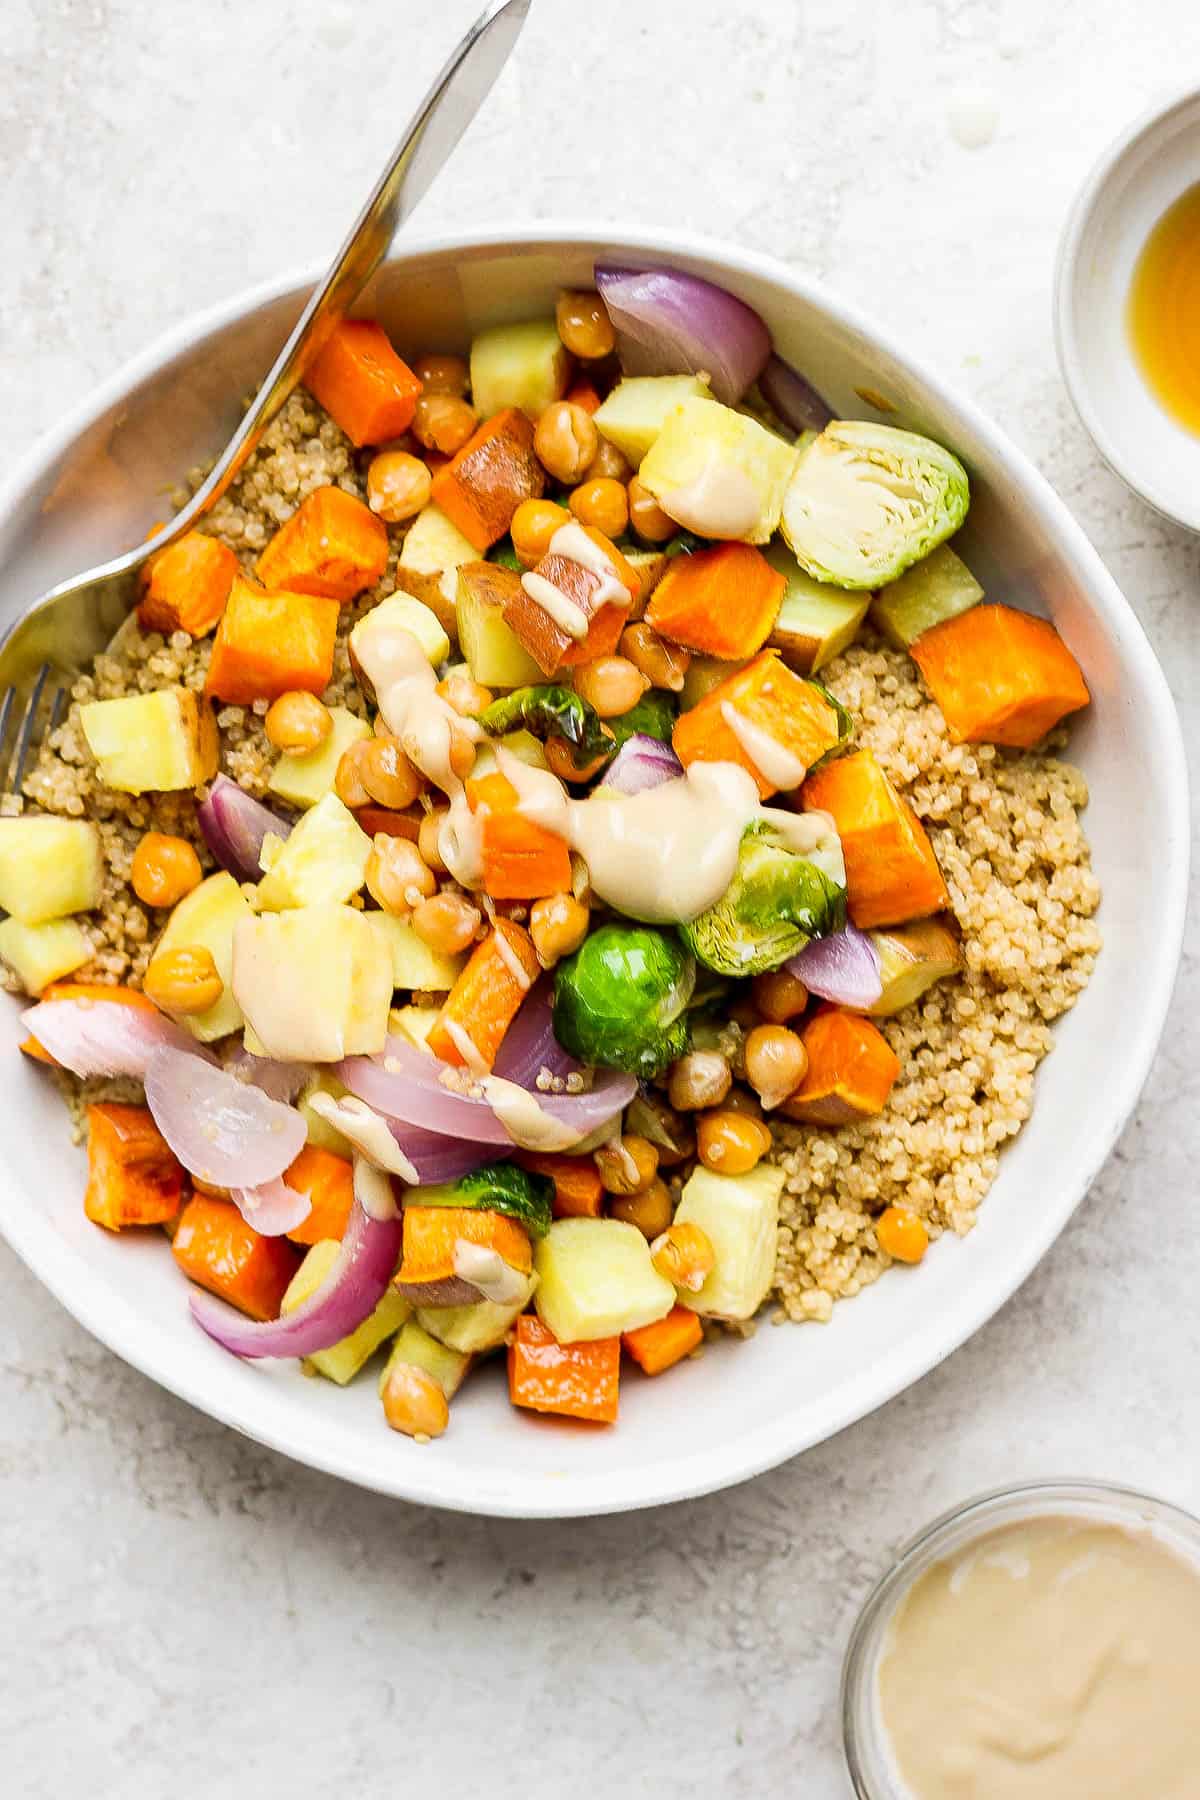 A quinoa bowl with veggies and peanut sauce on the top.